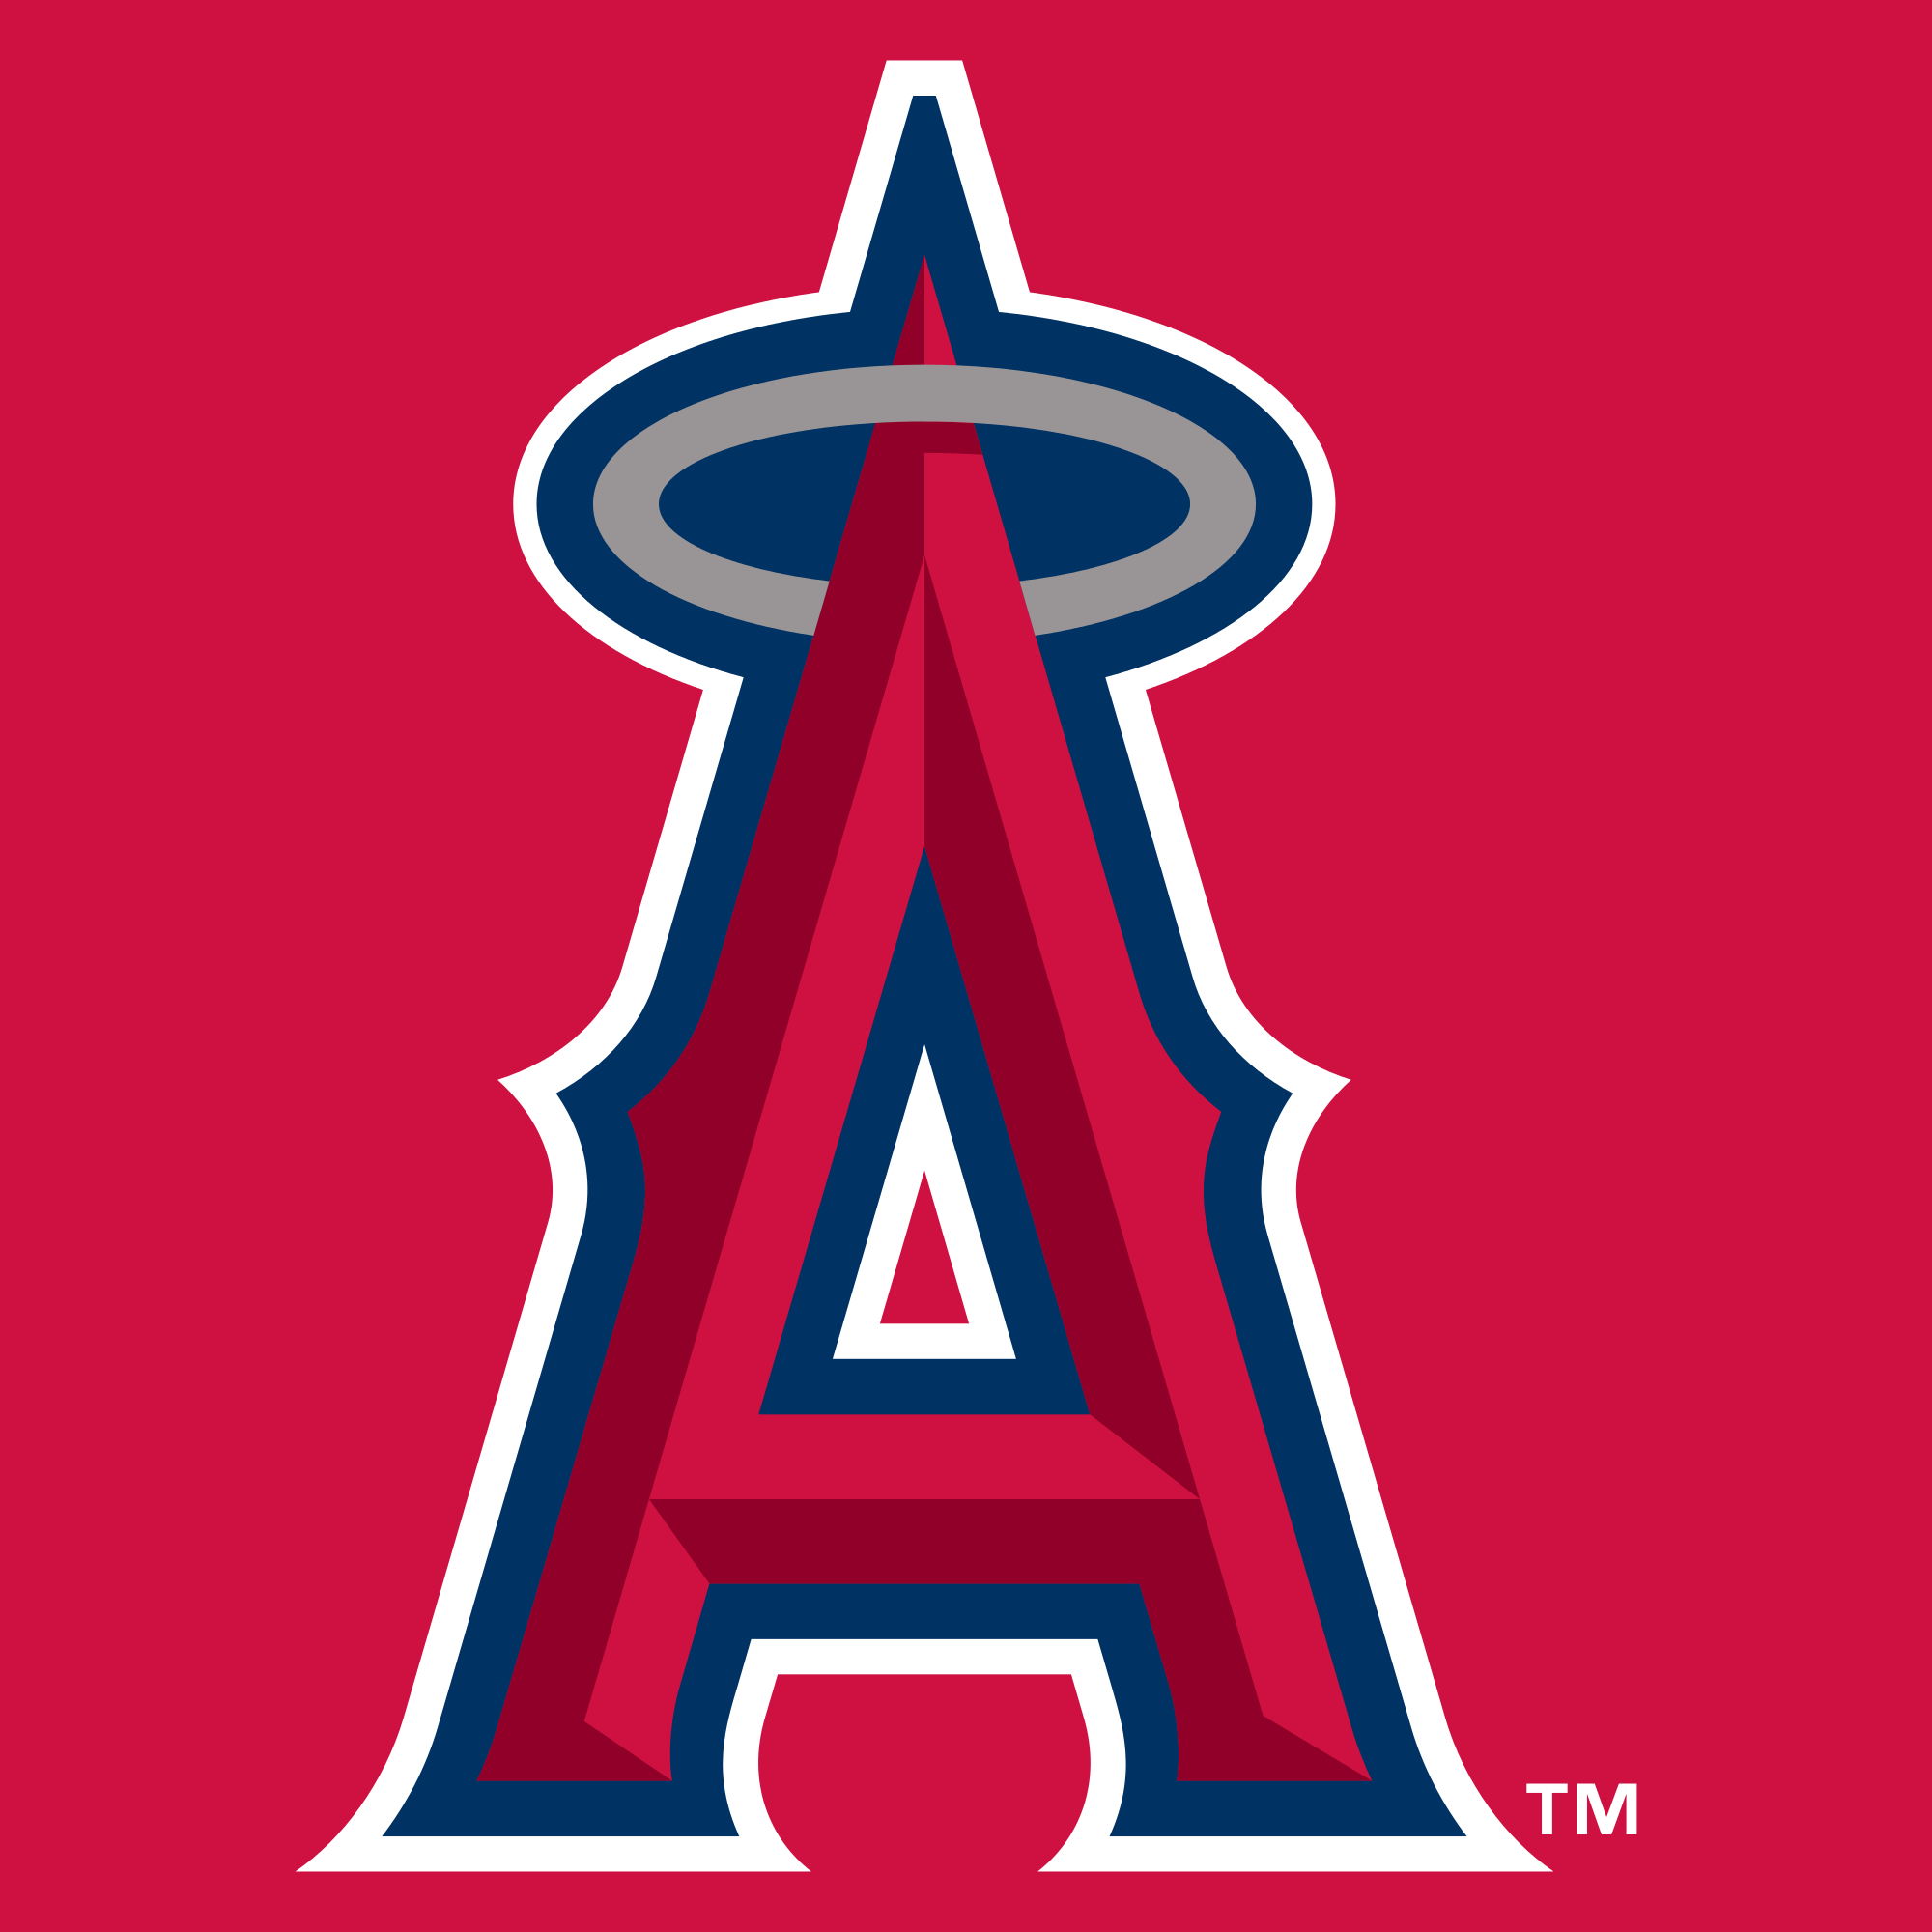 Los Angeles Angels Of Anaheim Backgrounds, Compatible - PC, Mobile, Gadgets| 2000x2000 px